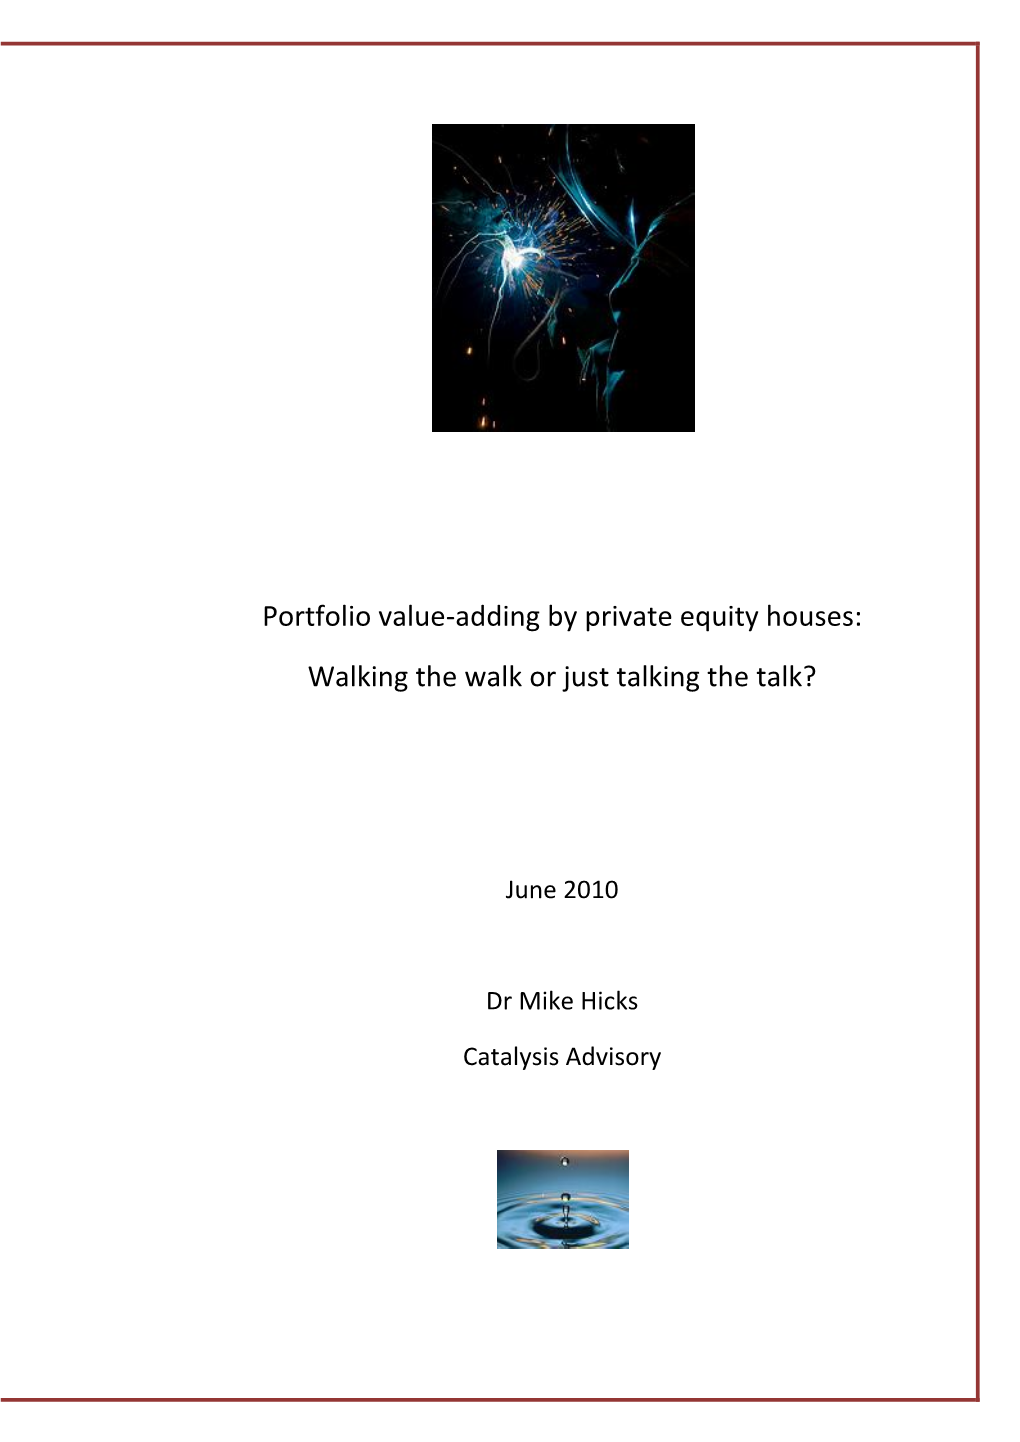 Portfolio Value-Adding by Private Equity Houses: Walking the Walk Or Just Talking the Talk?